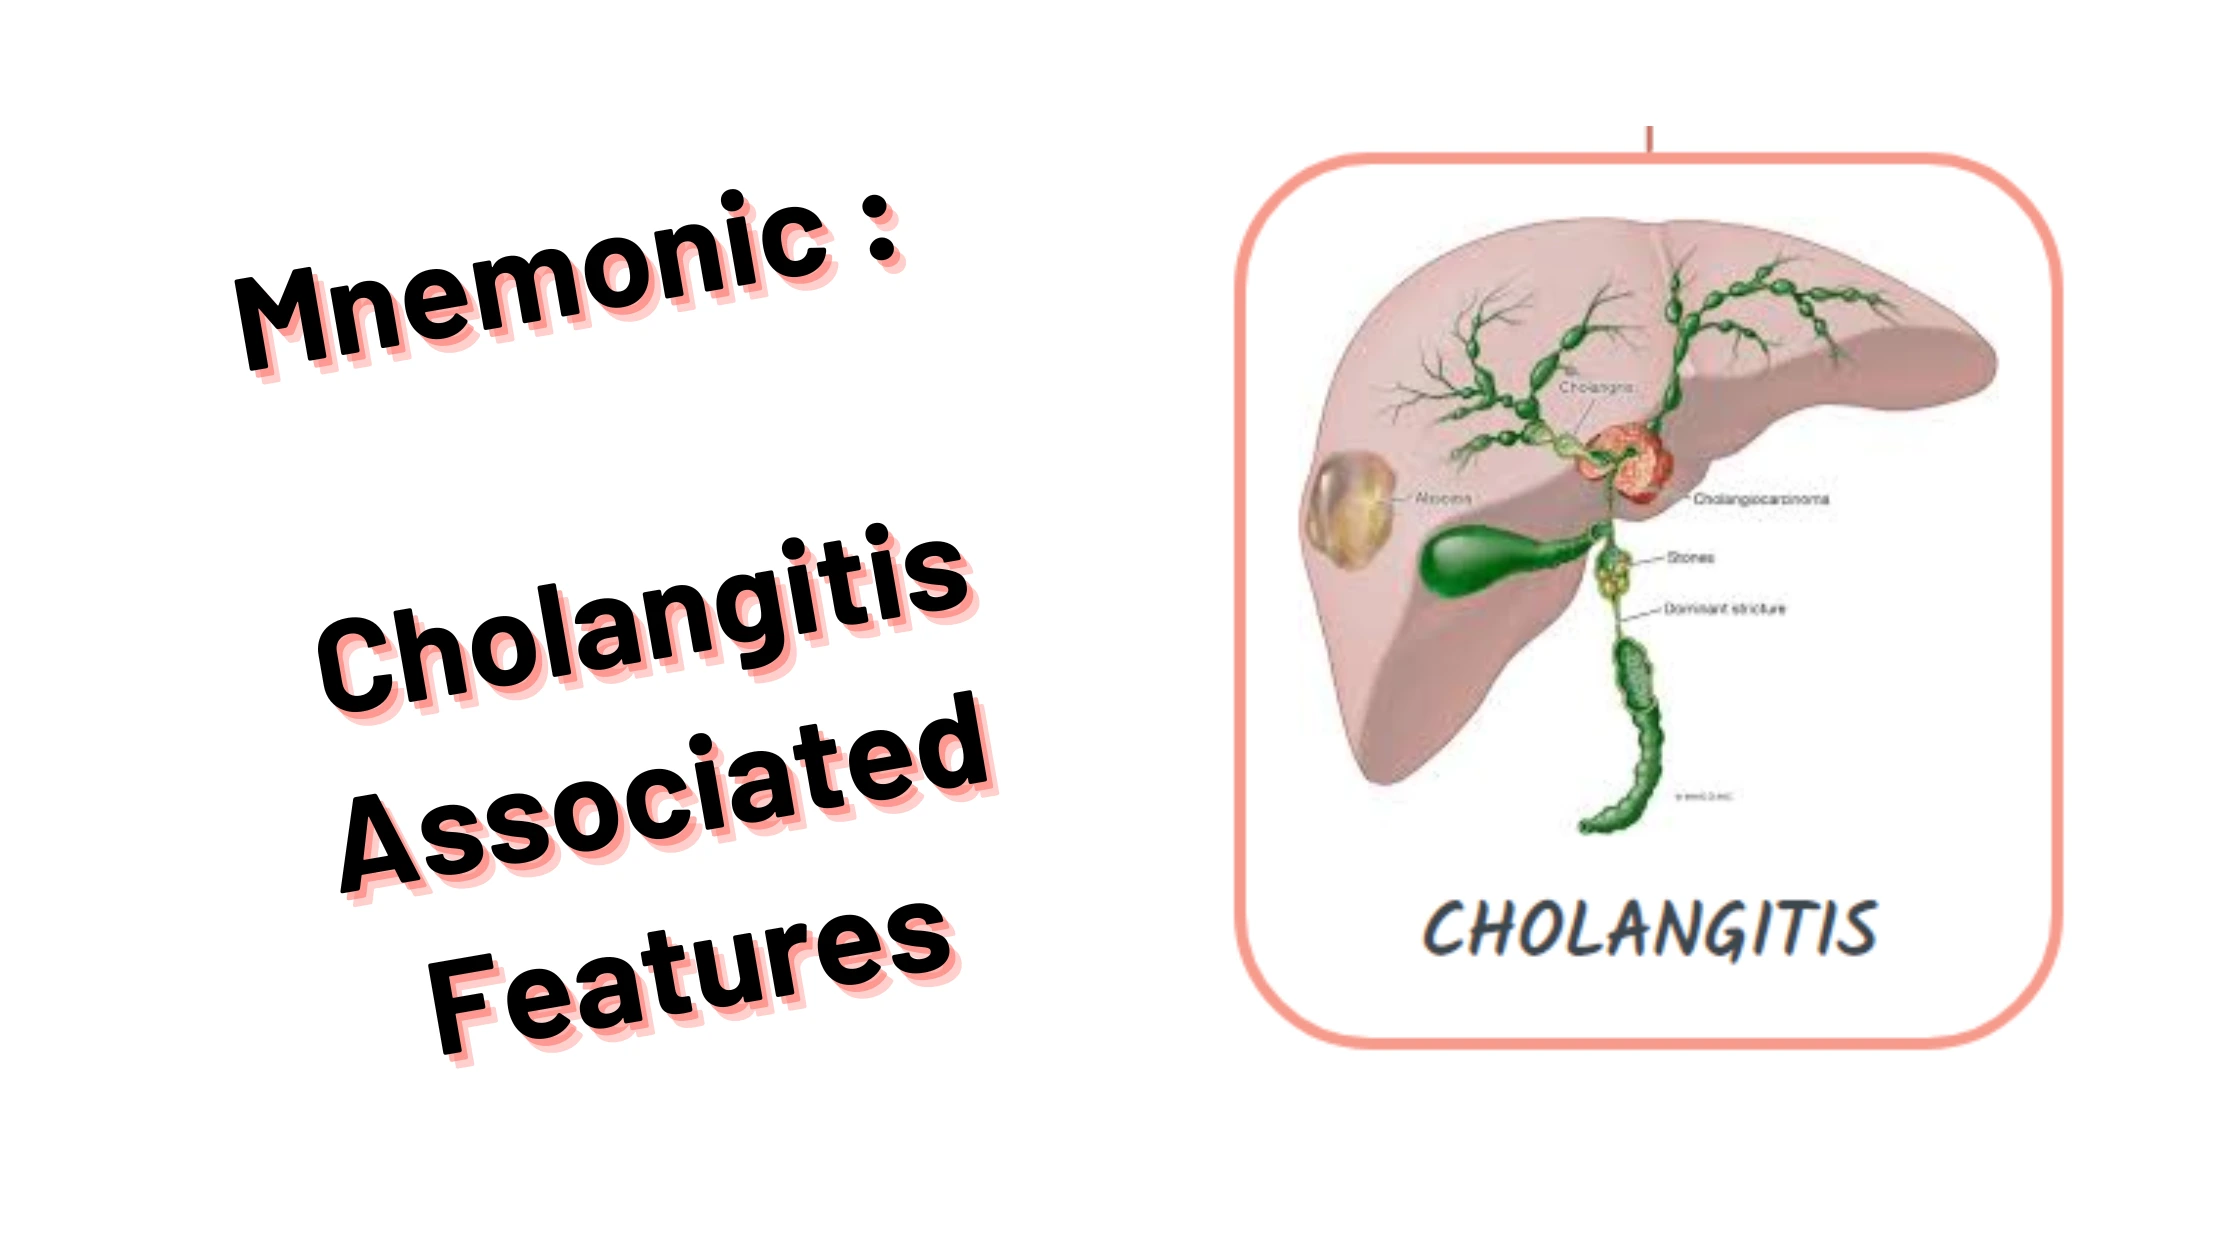 You are currently viewing [Very Cool] Mnemonic : Cholangitis Associated Features That You Don’t Know